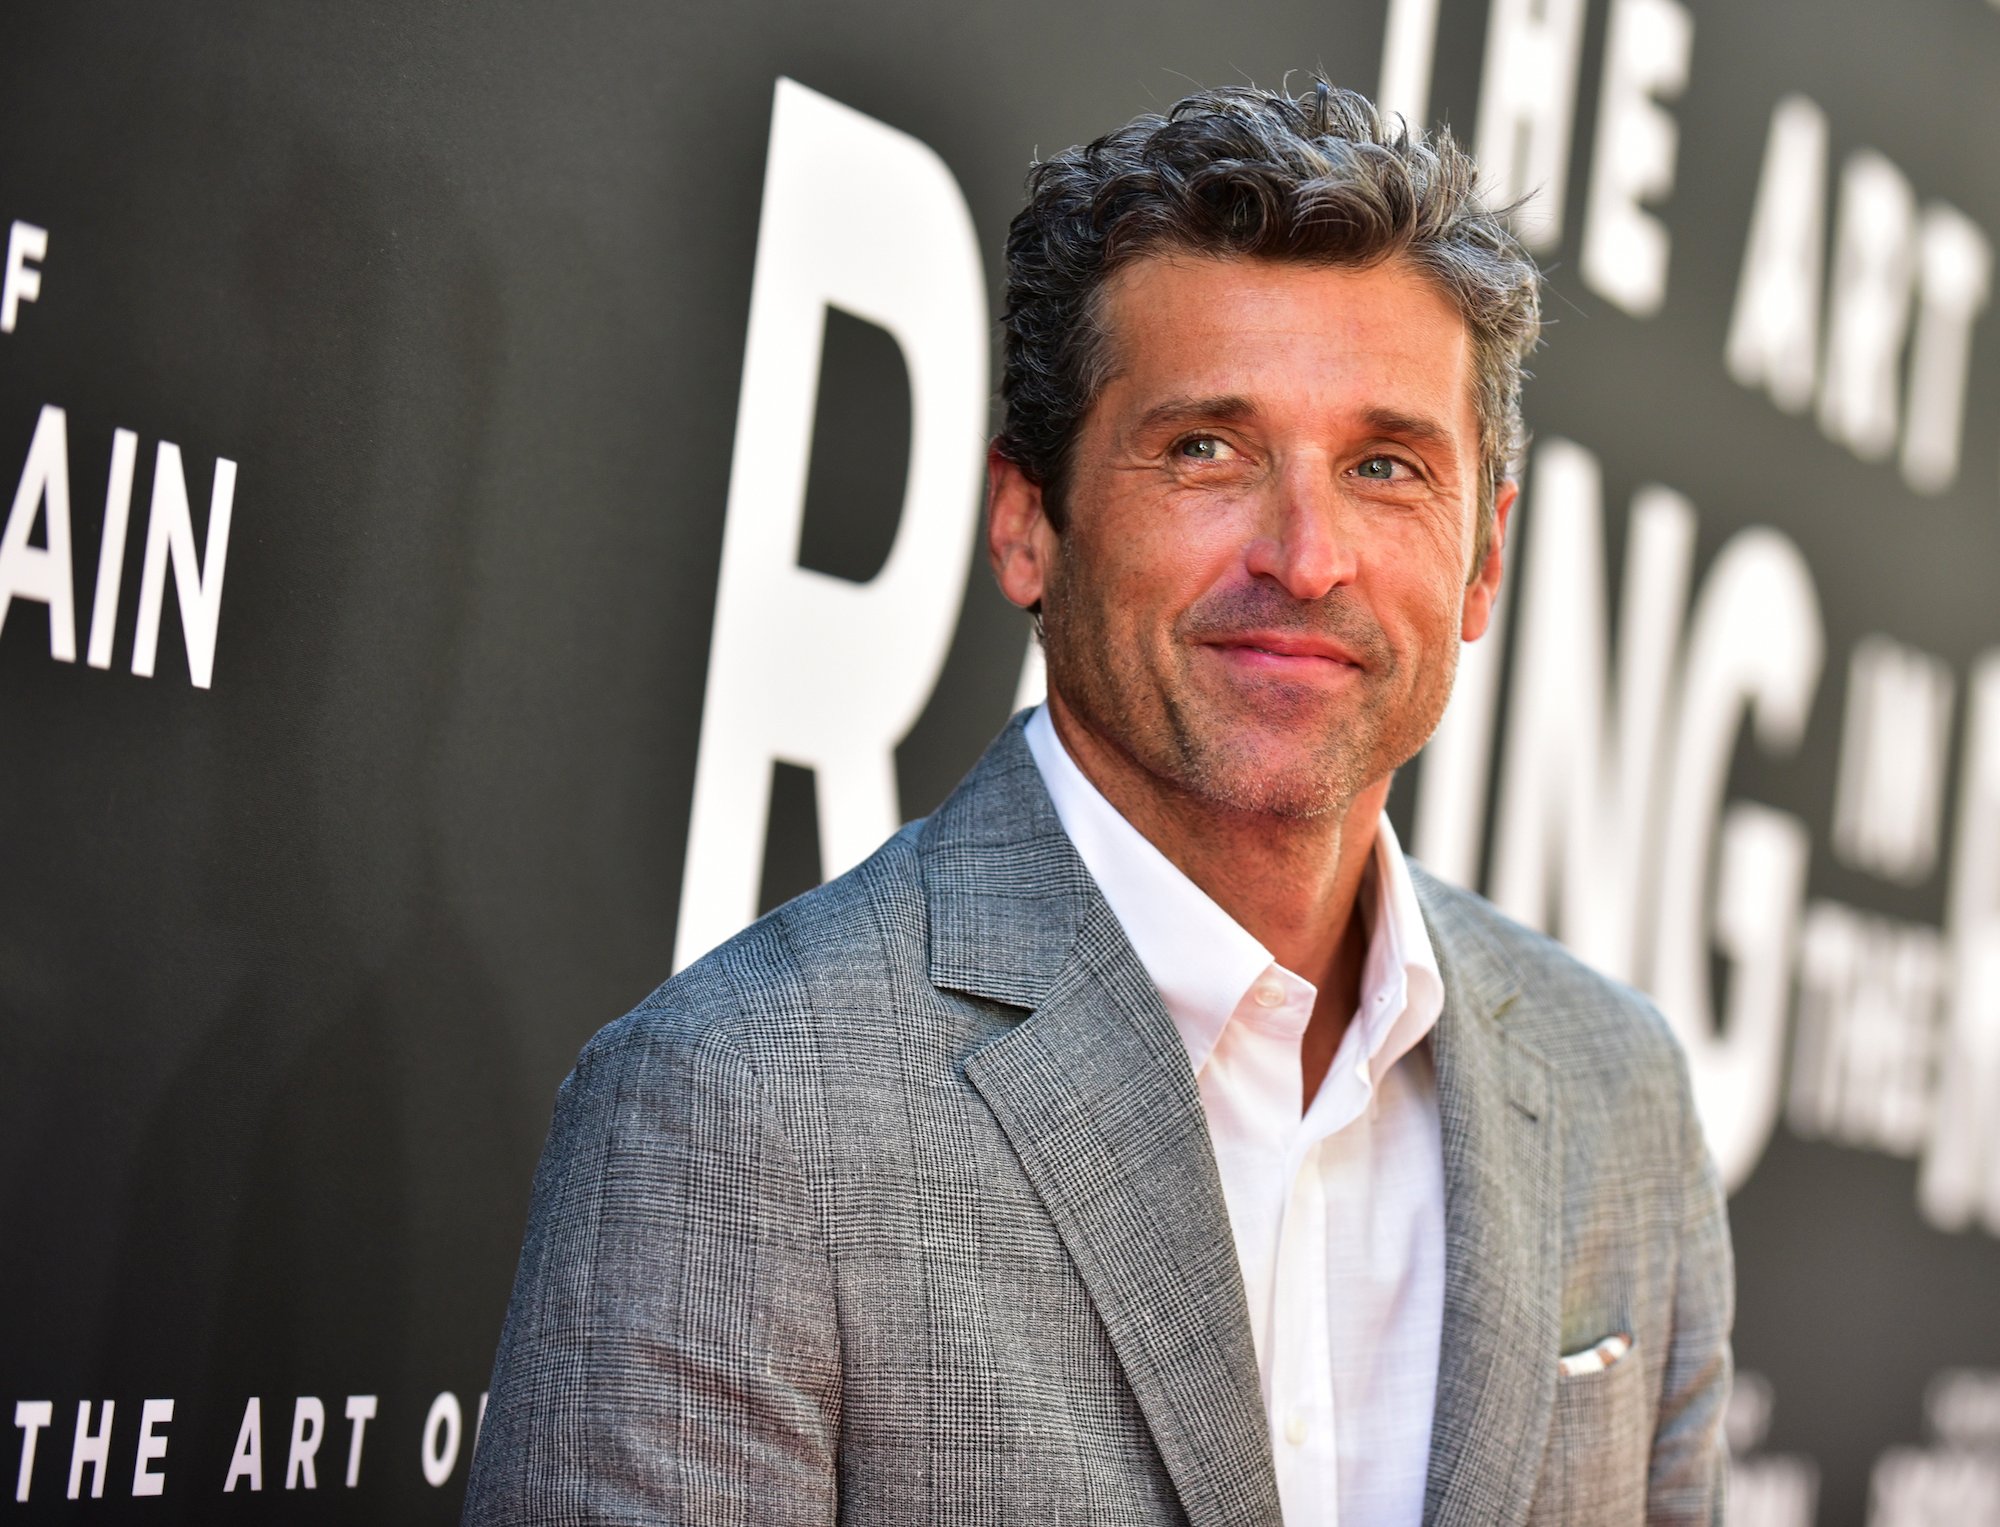 Patrick Dempsey smiling, looking to the side